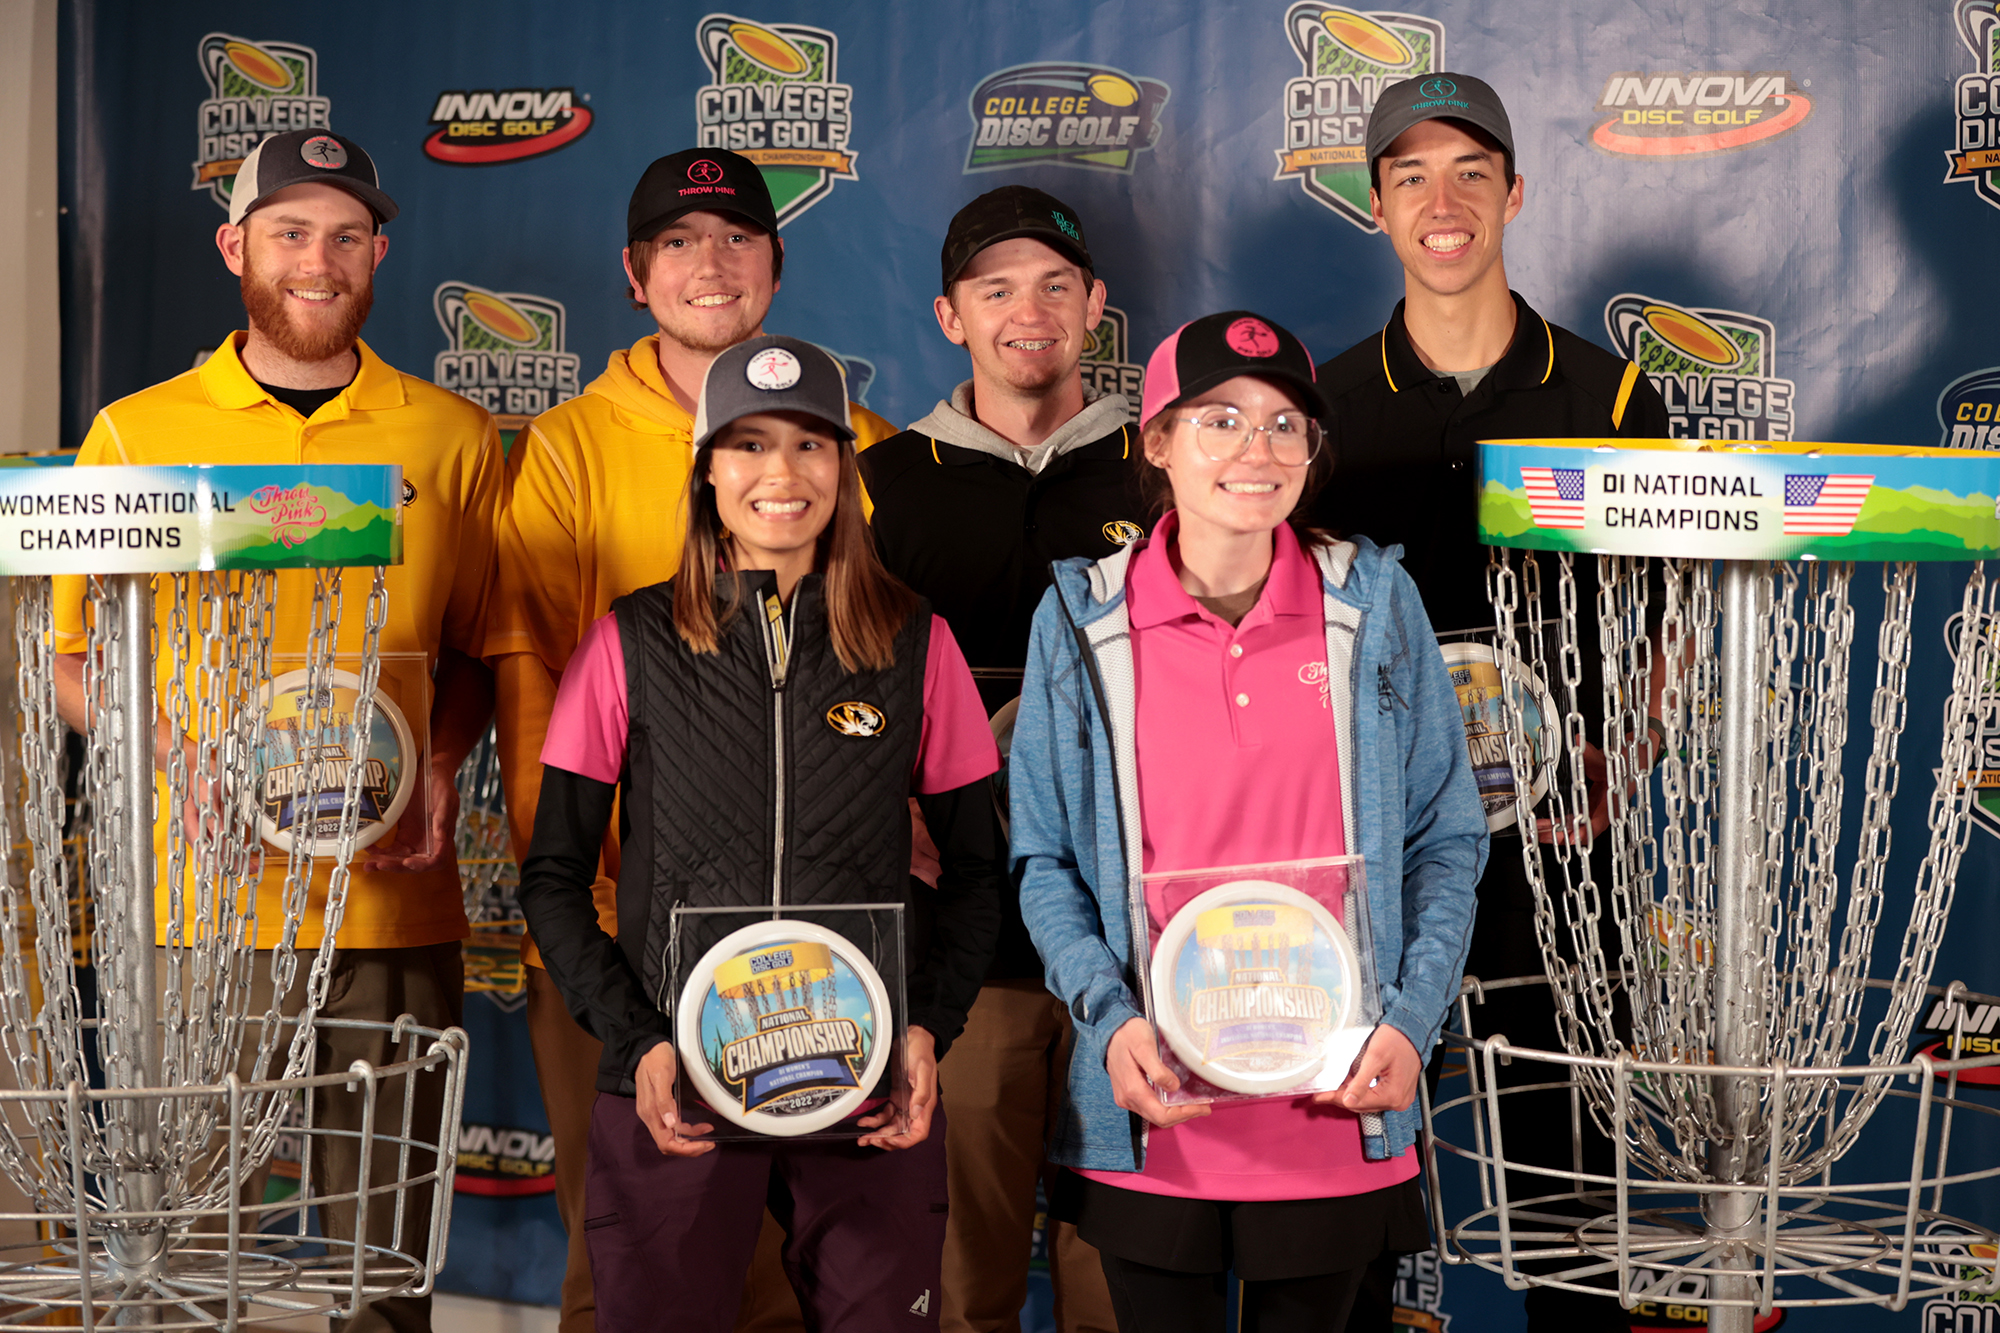 six mizzou disc golf players pose with their trophies